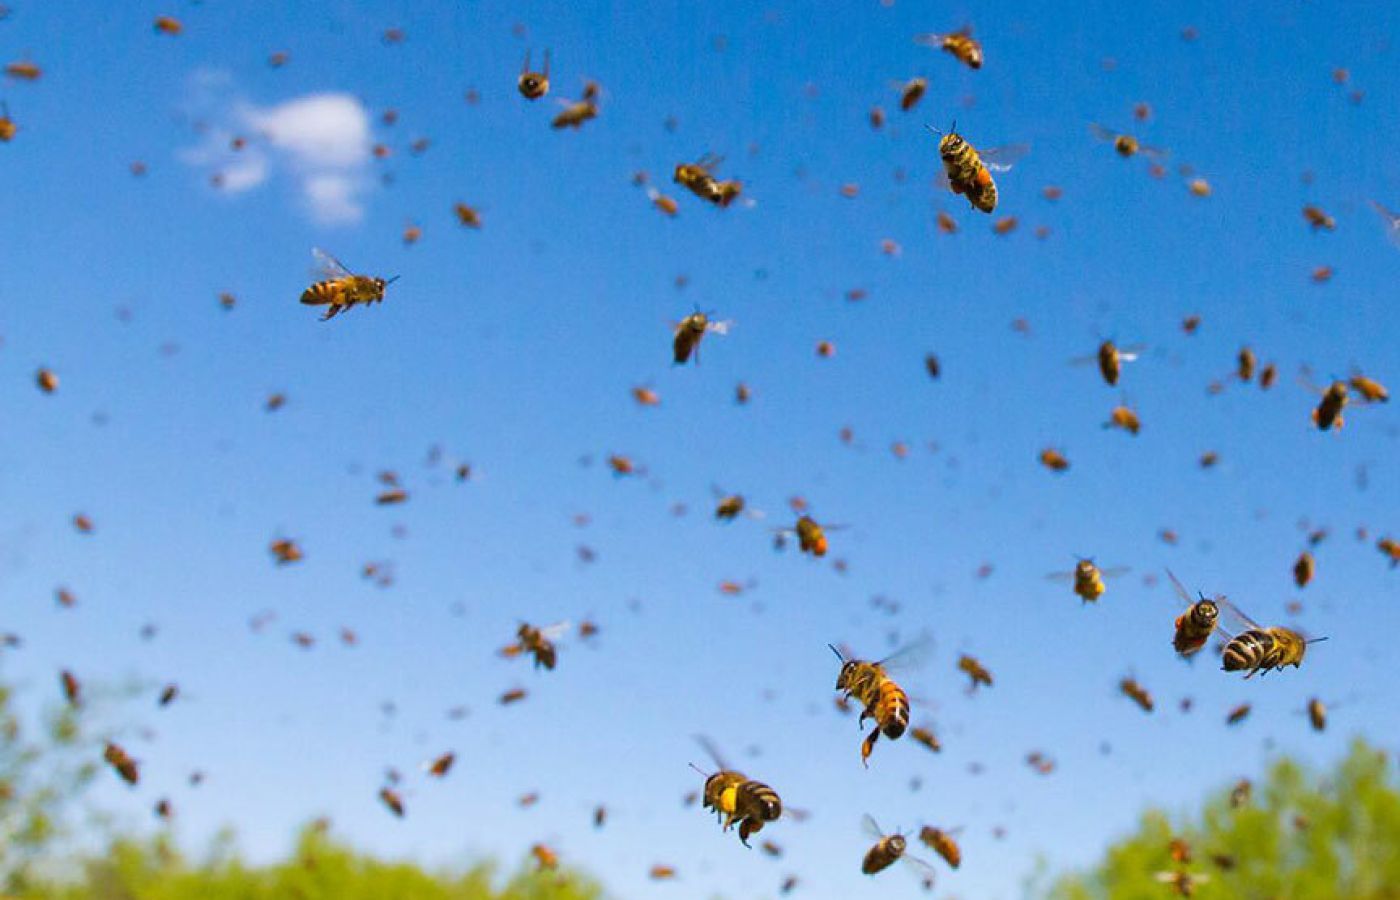 Swarming and nesting bees may lead to bee removal from your property